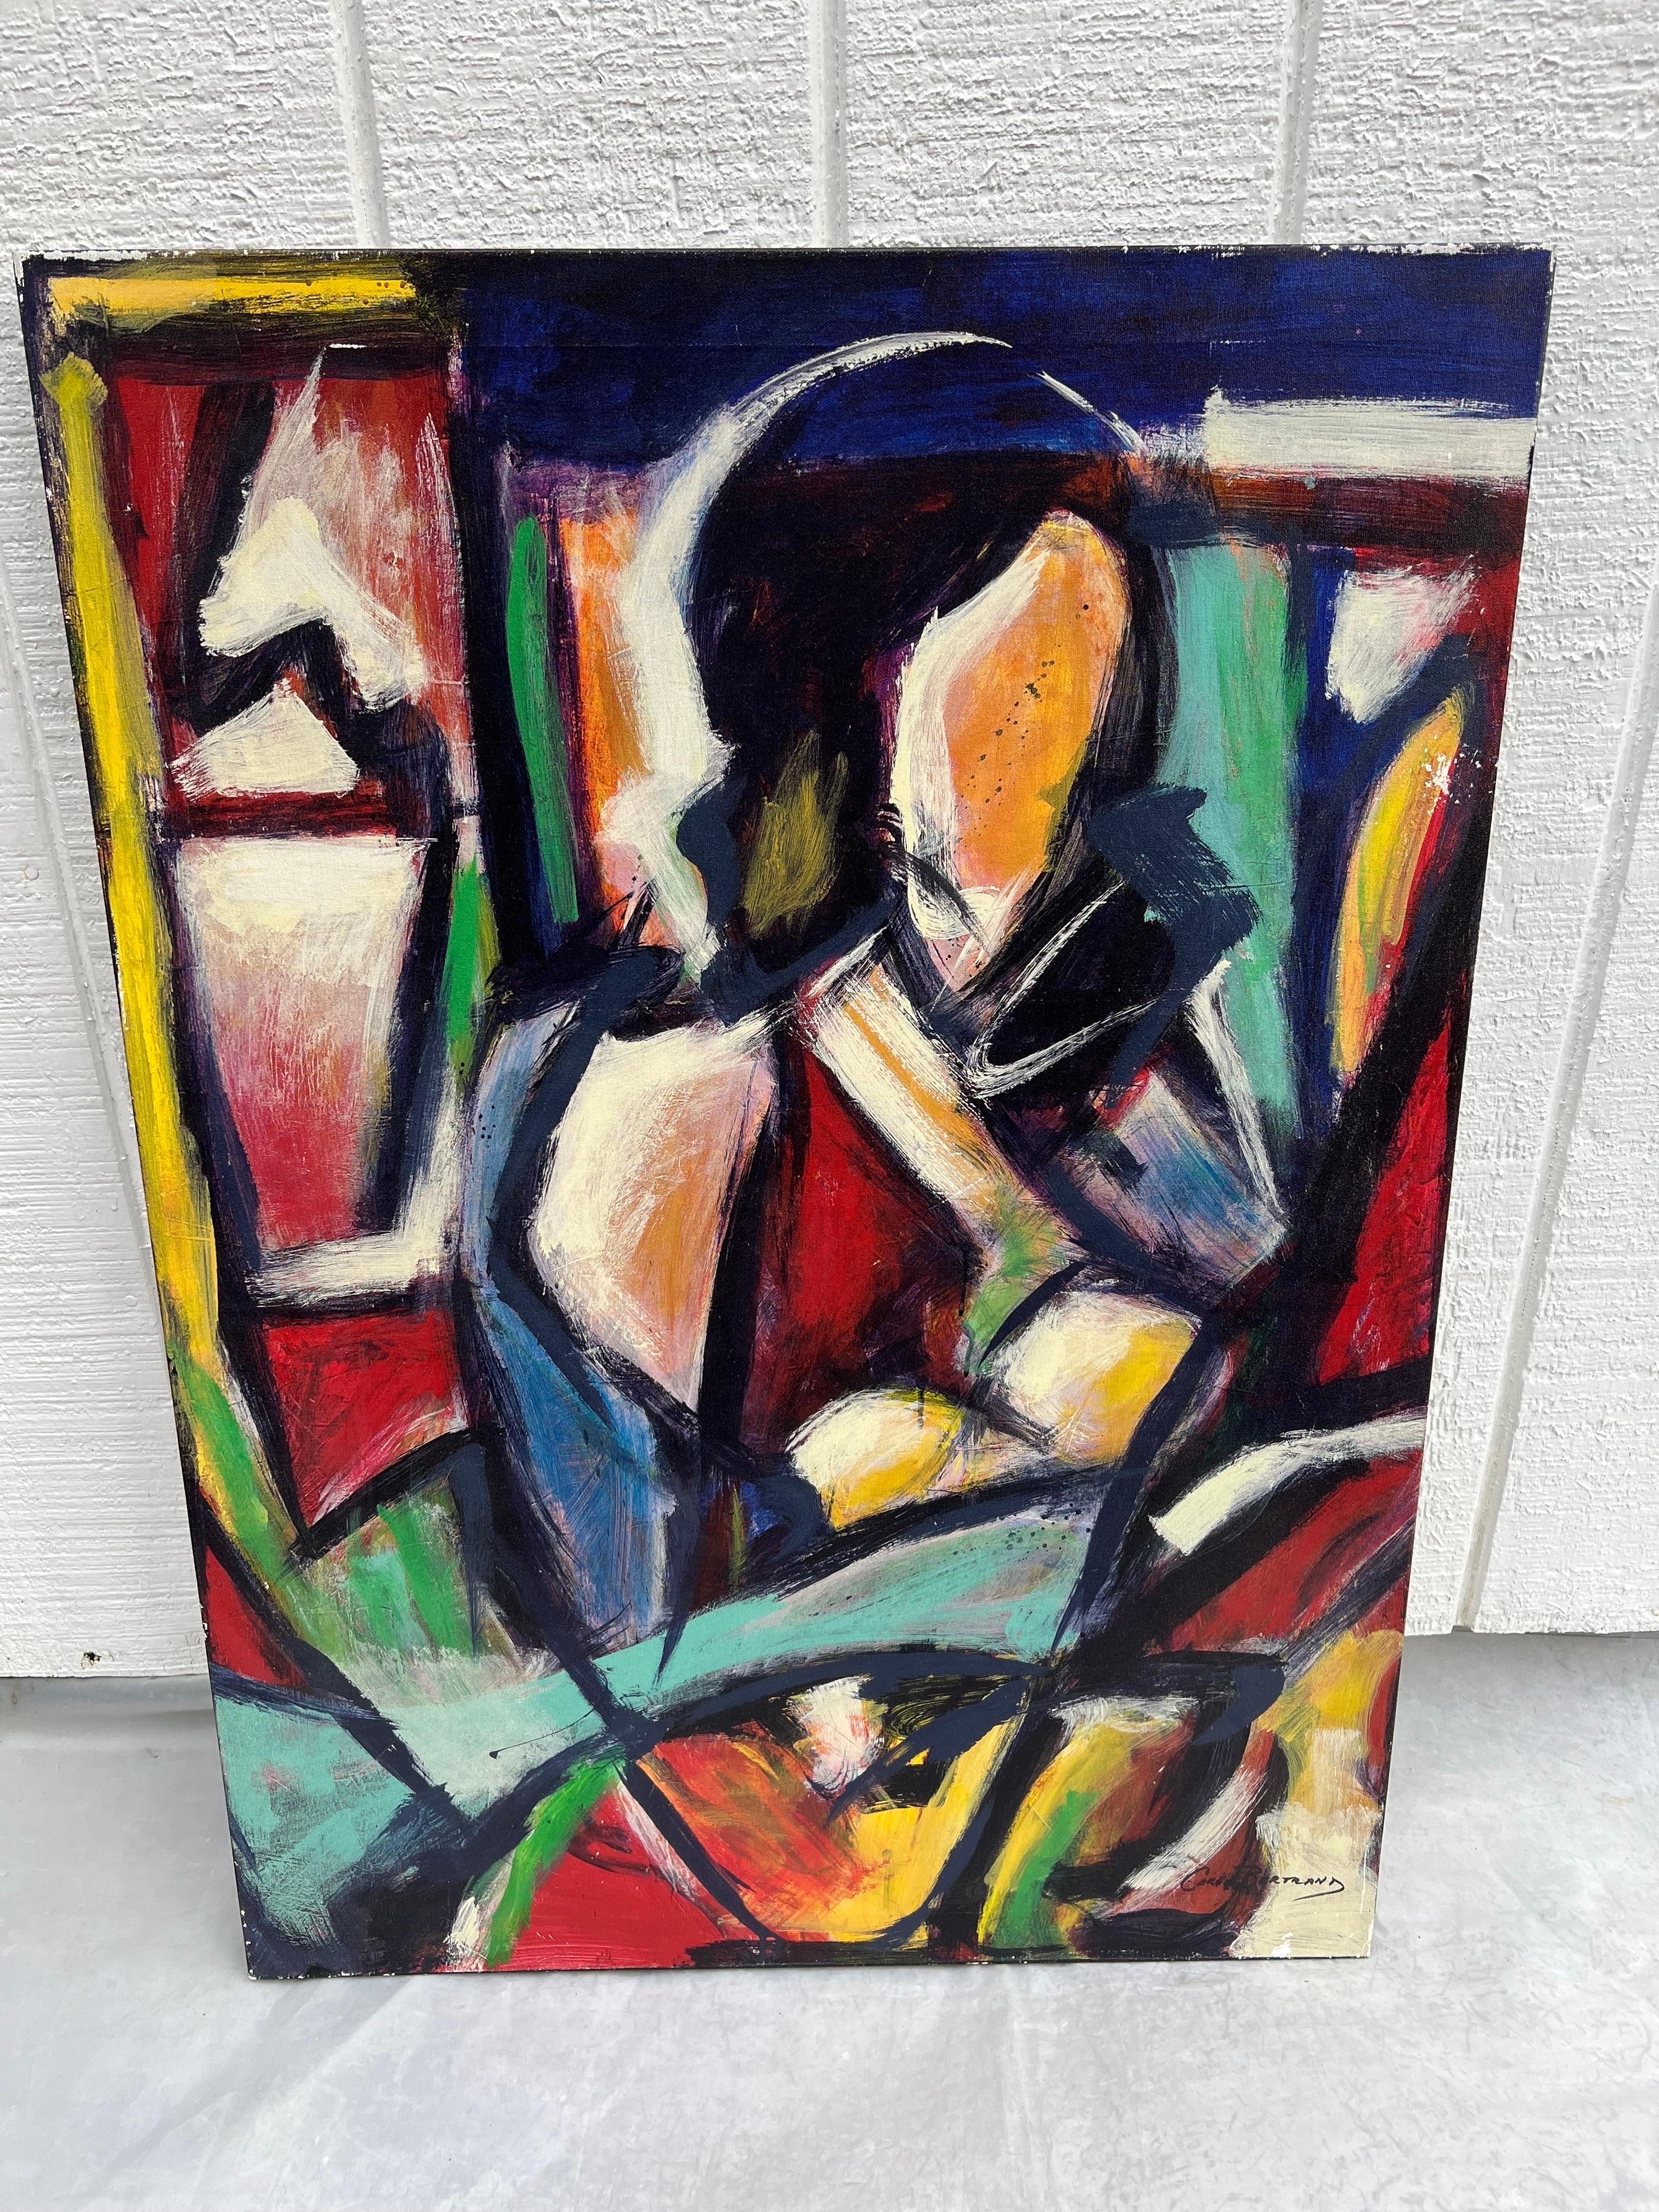 Carol Bertrand Mid-Century Modern Abstract of a Woman. Amazing large canvas with mostly primary colors of blue, red ,yellow and light green. Signature of artist in the lower right corner.
Carol Kuhlman Bertrand grew up in Missouri and studied